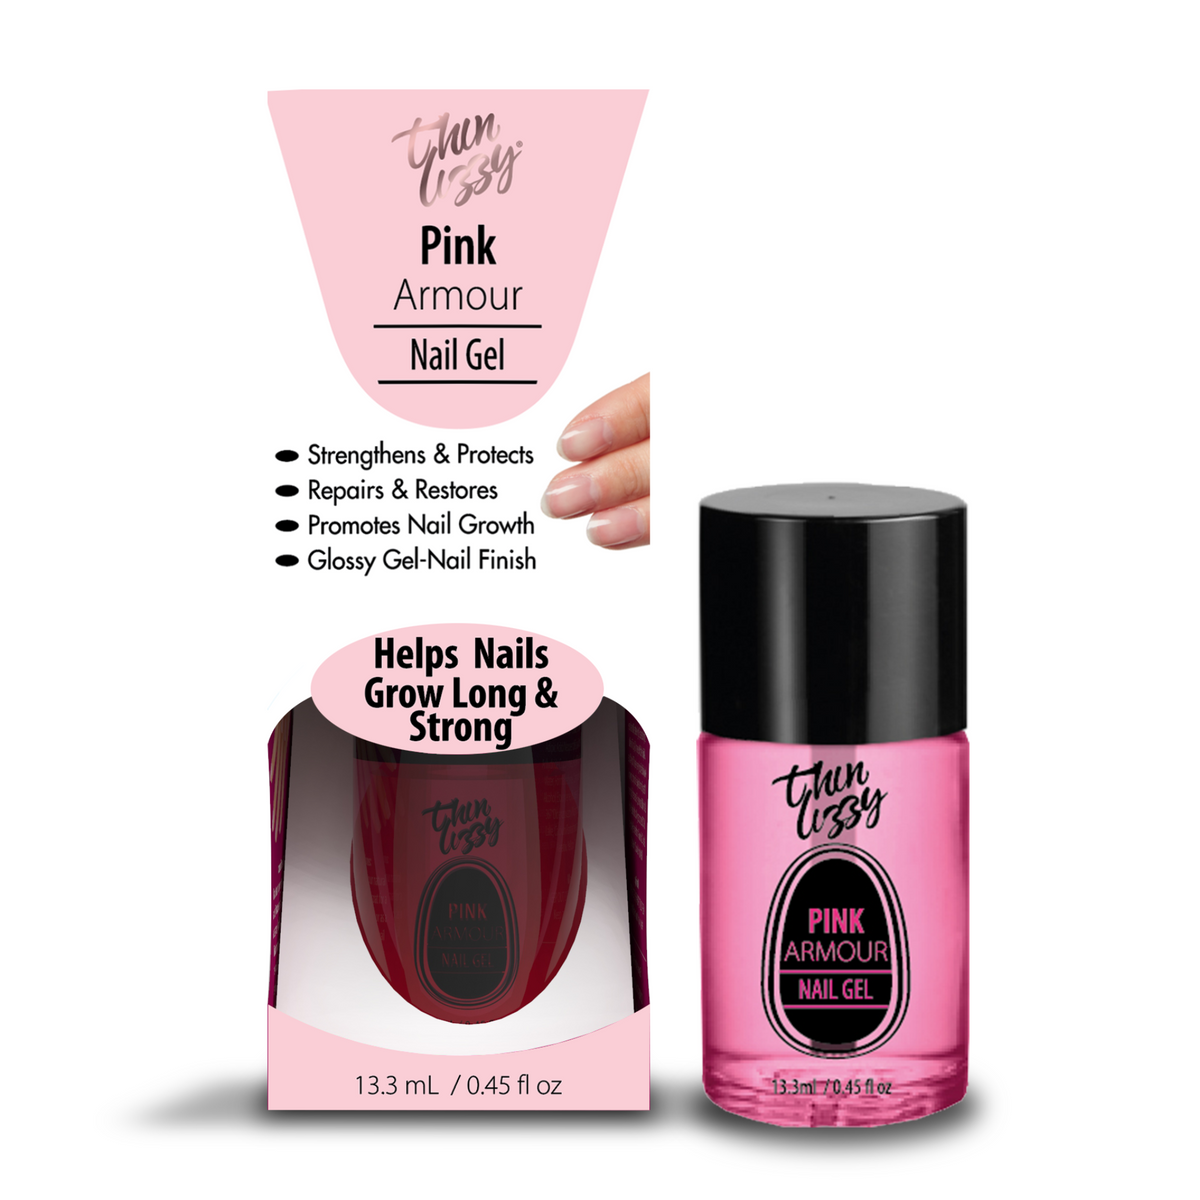 Pink Armor Nail Gel Reviews - Too Good to be True?